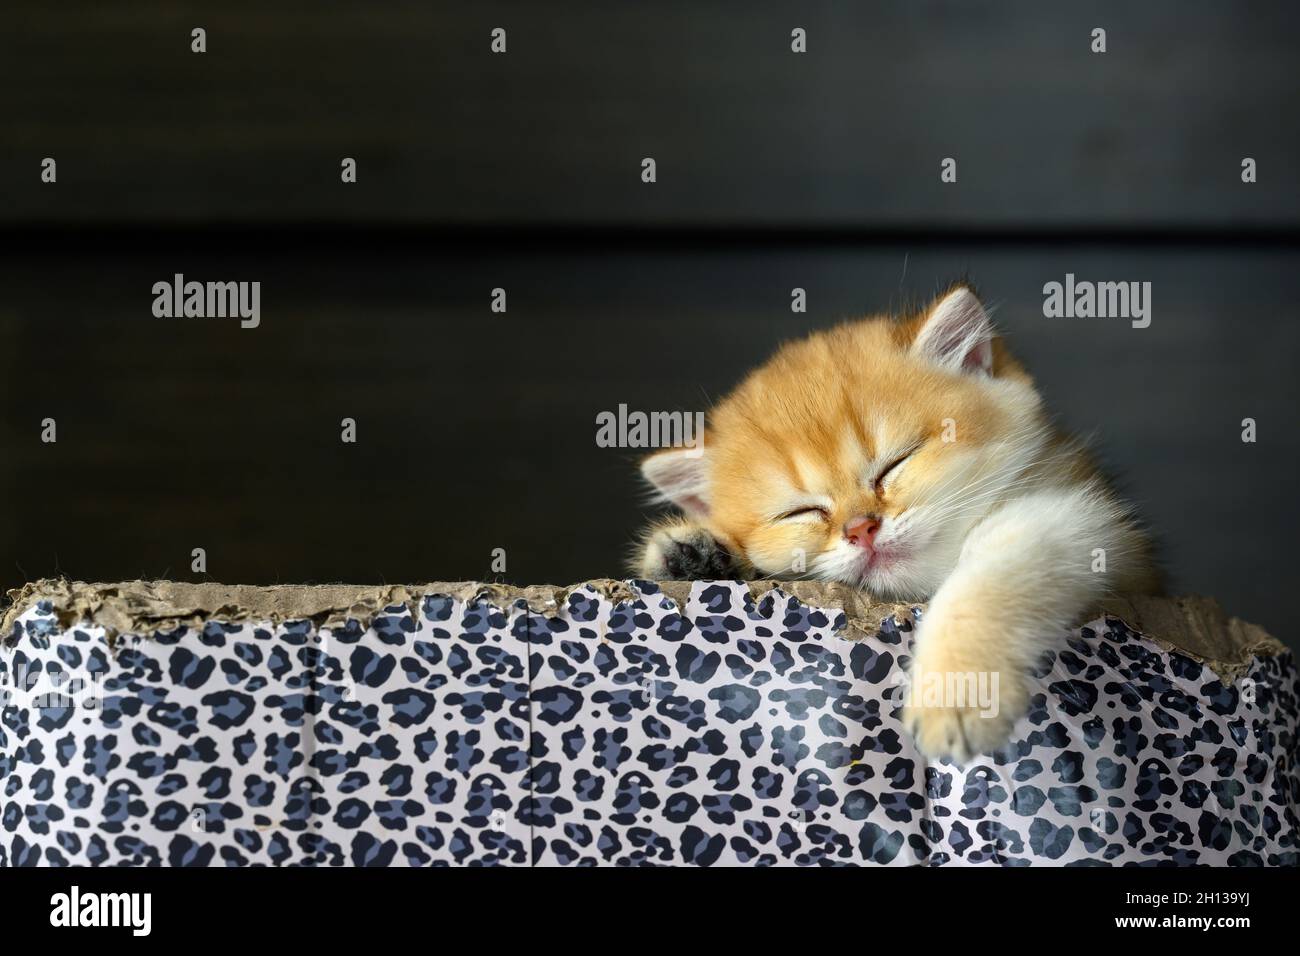 British Shorthair kittens The golden pose is cute and sleepy, the cat is sleeping in a box with a leopard pattern. Pure and beautiful pedigree kittens Stock Photo